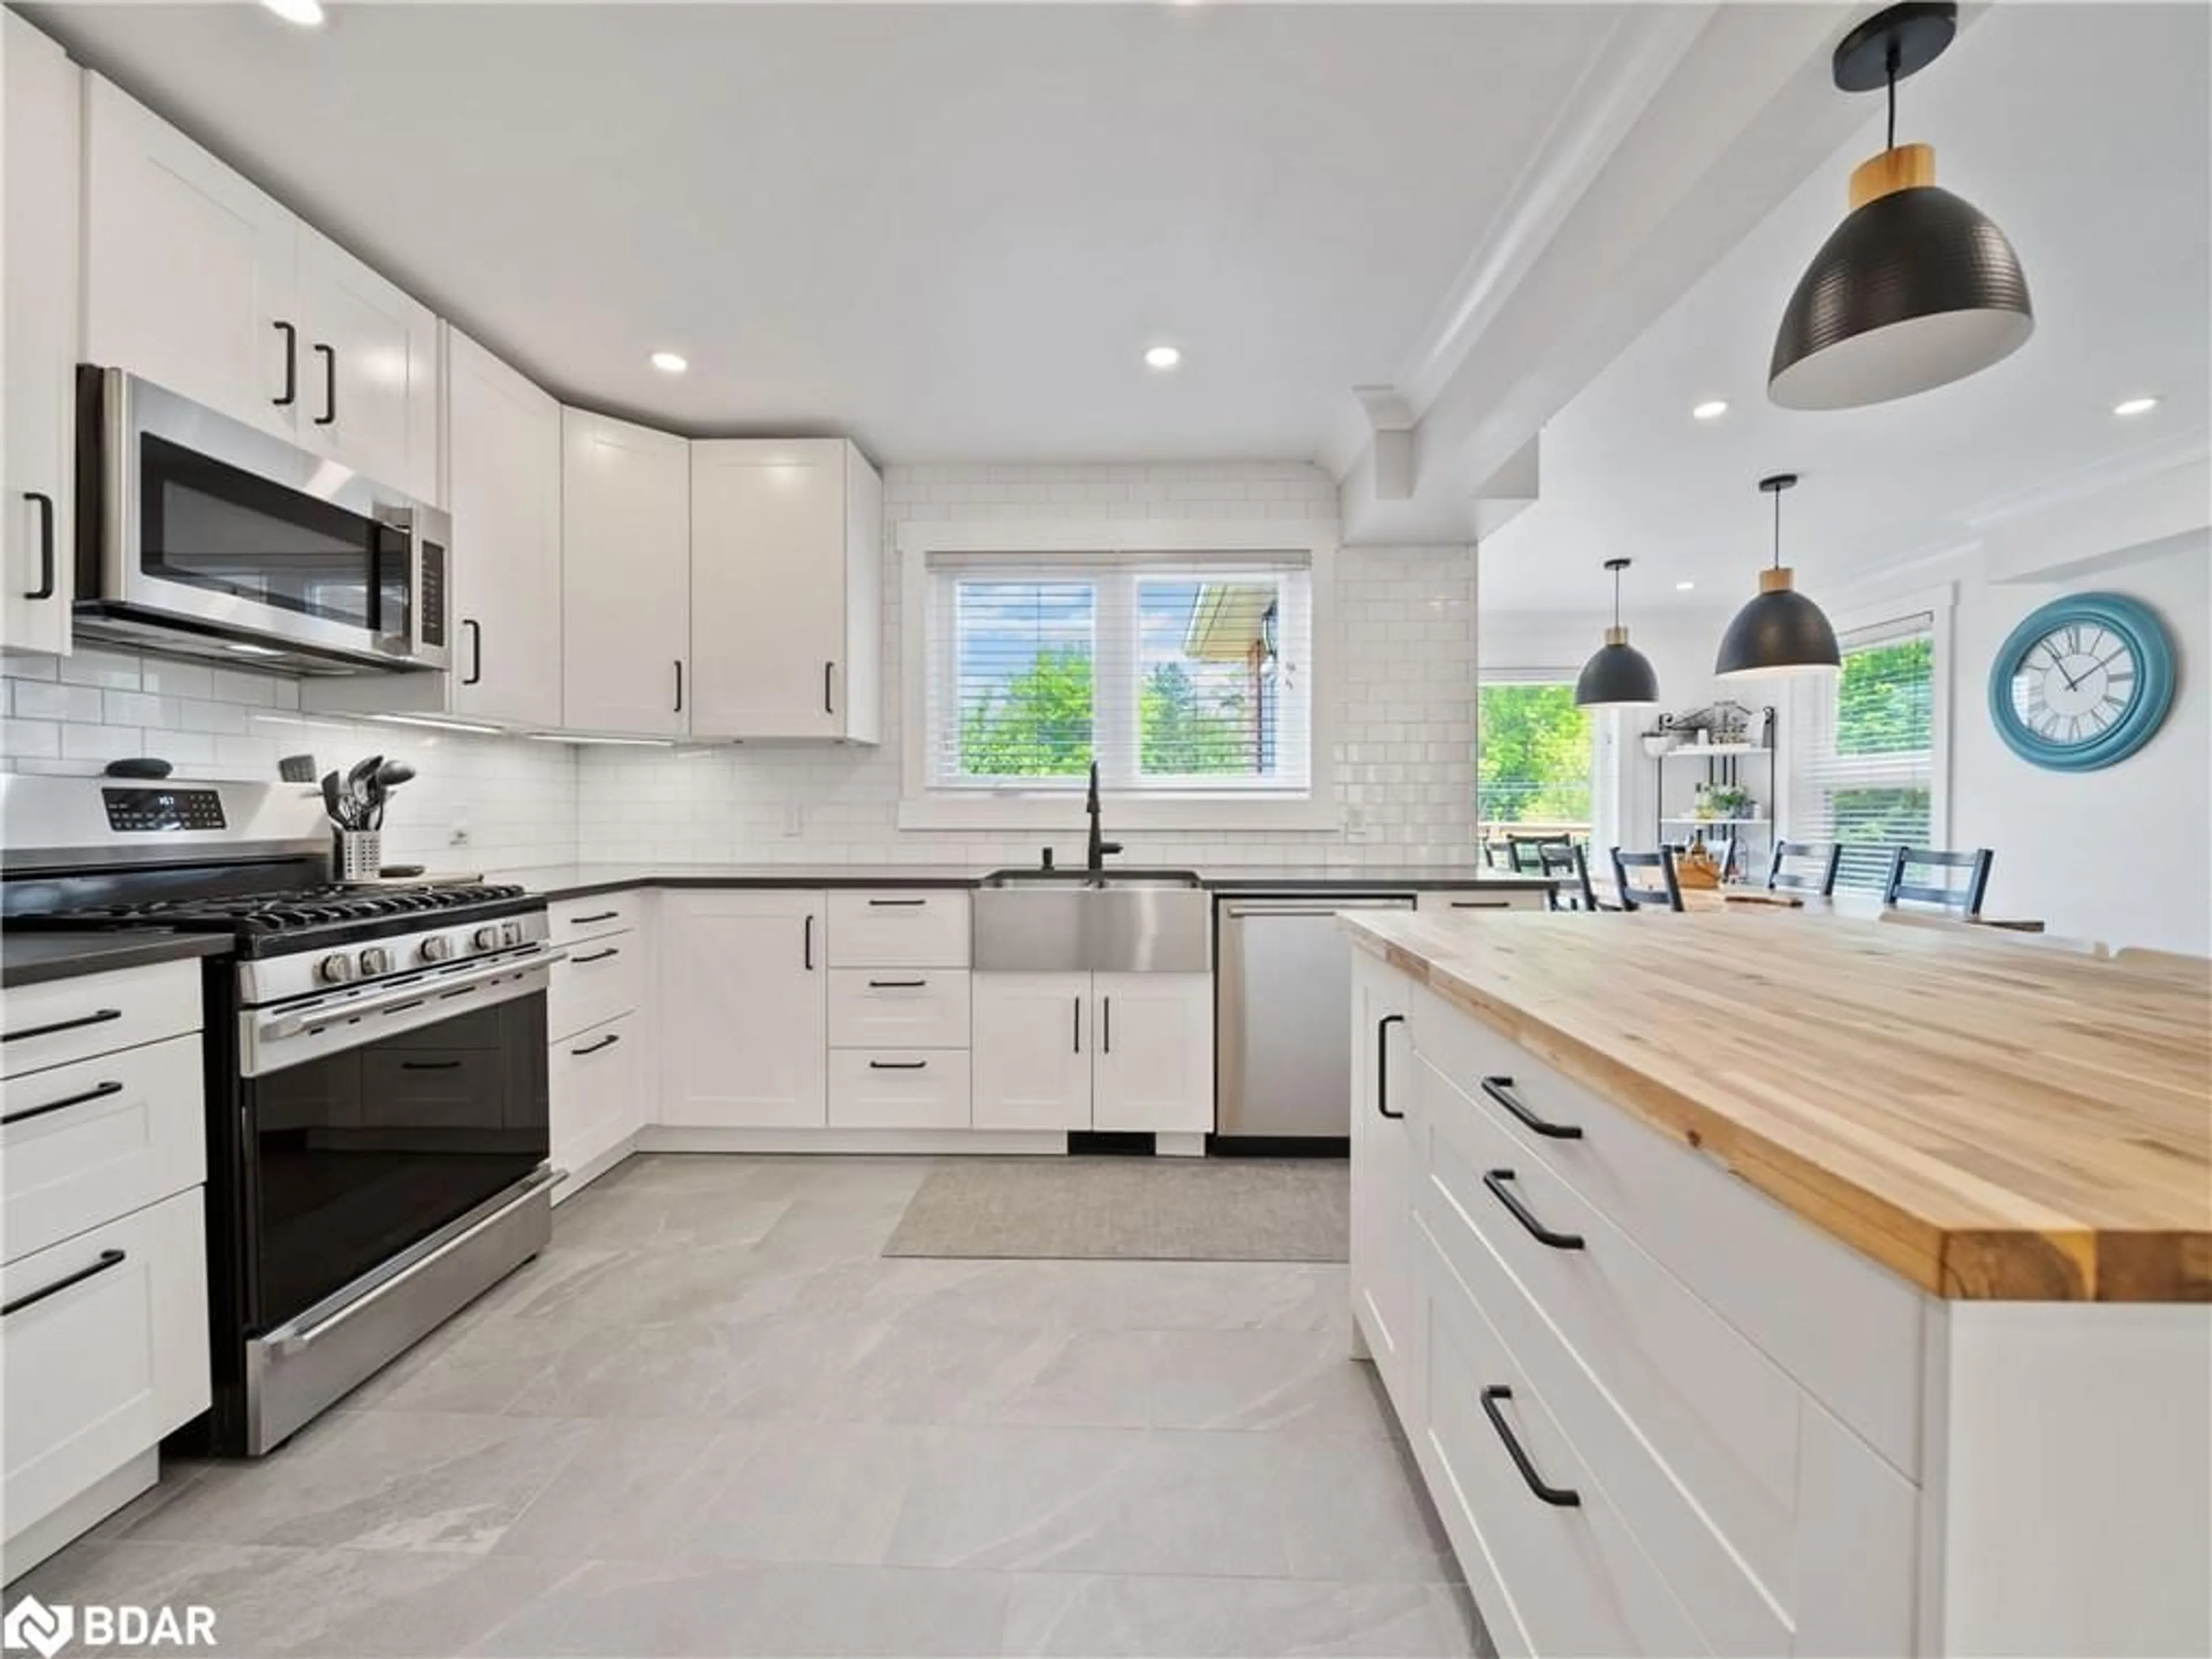 Contemporary kitchen for 56 Irwin Dr, Barrie Ontario L4N 7A7